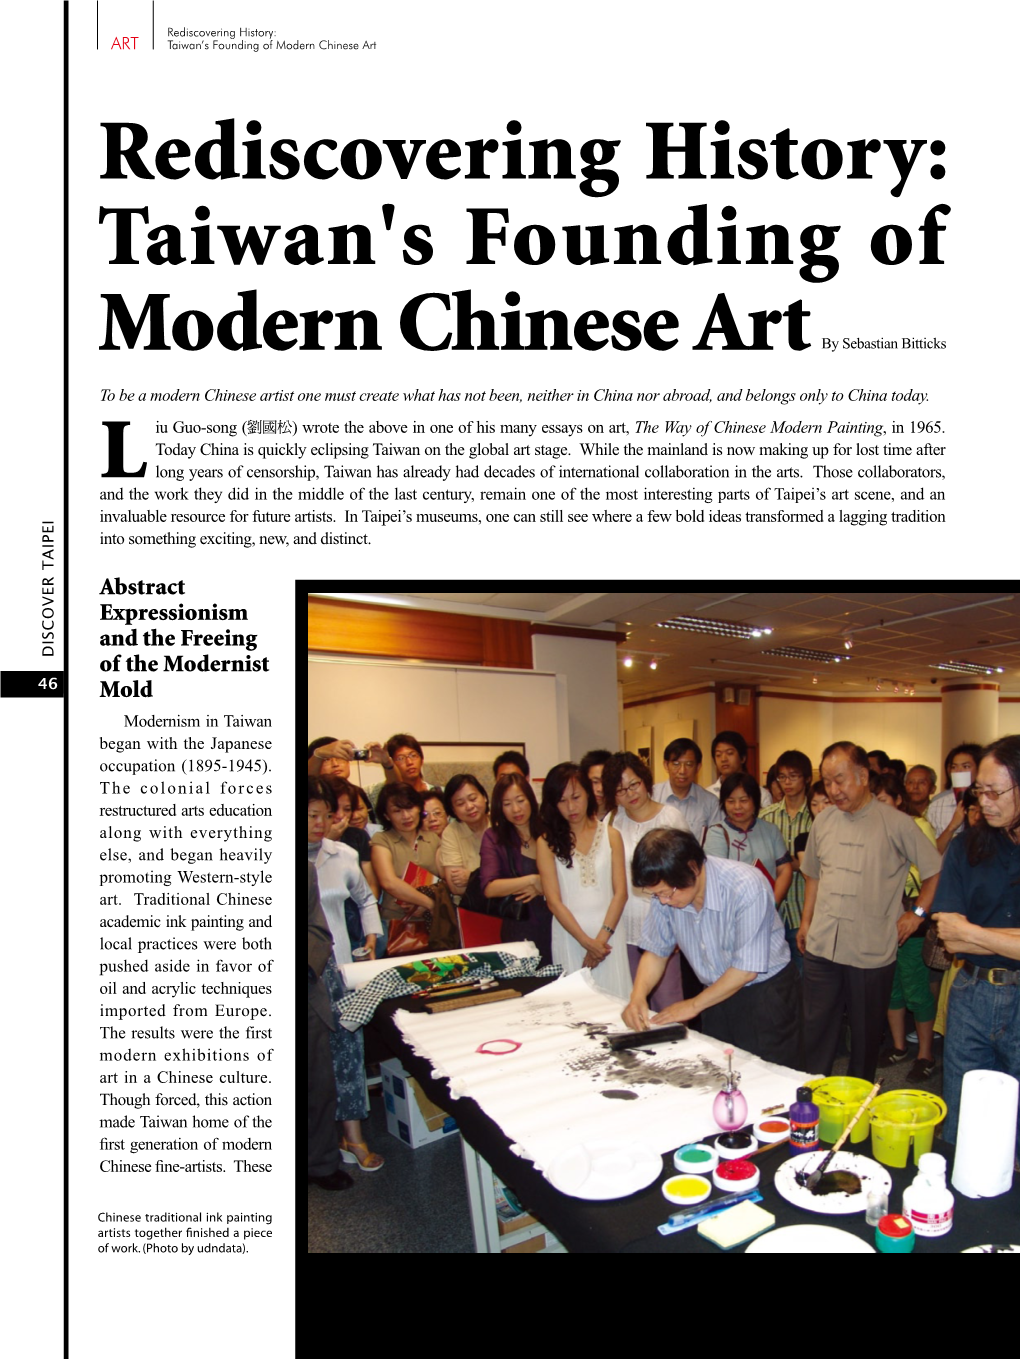 Rediscovering History: Taiwan's Founding of Modern Chinese